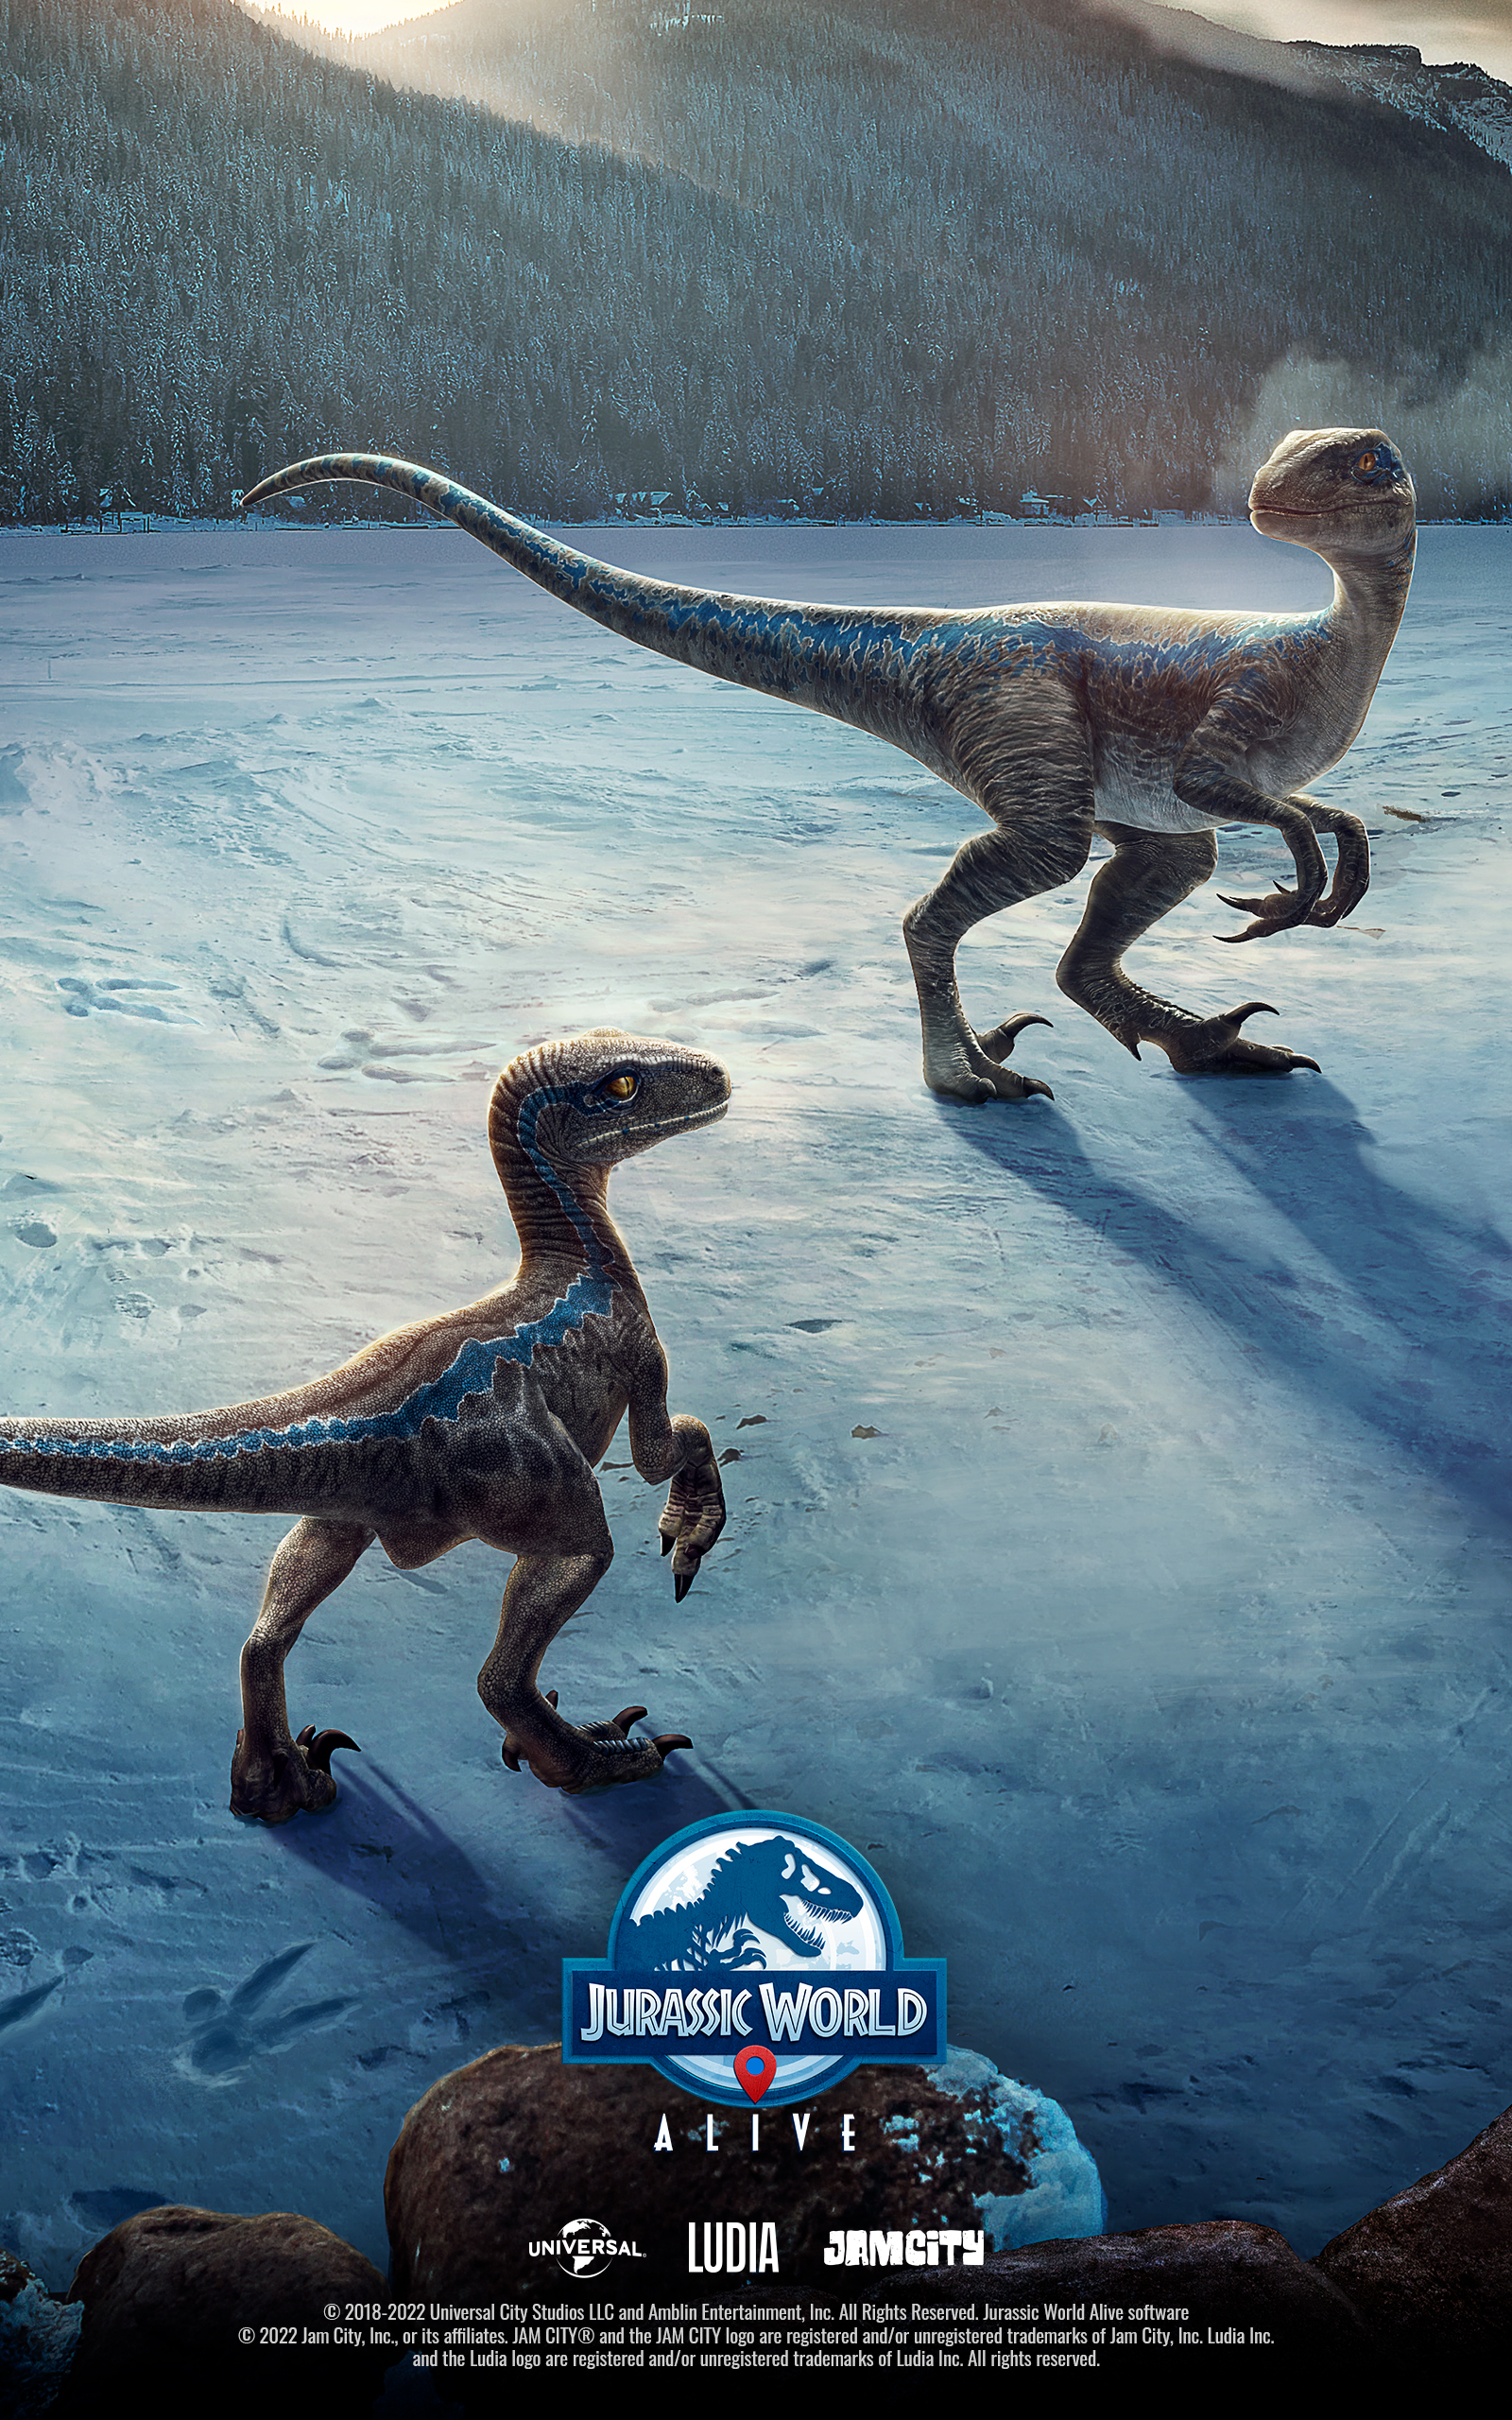 Jurassic World Wallpapers 76 images